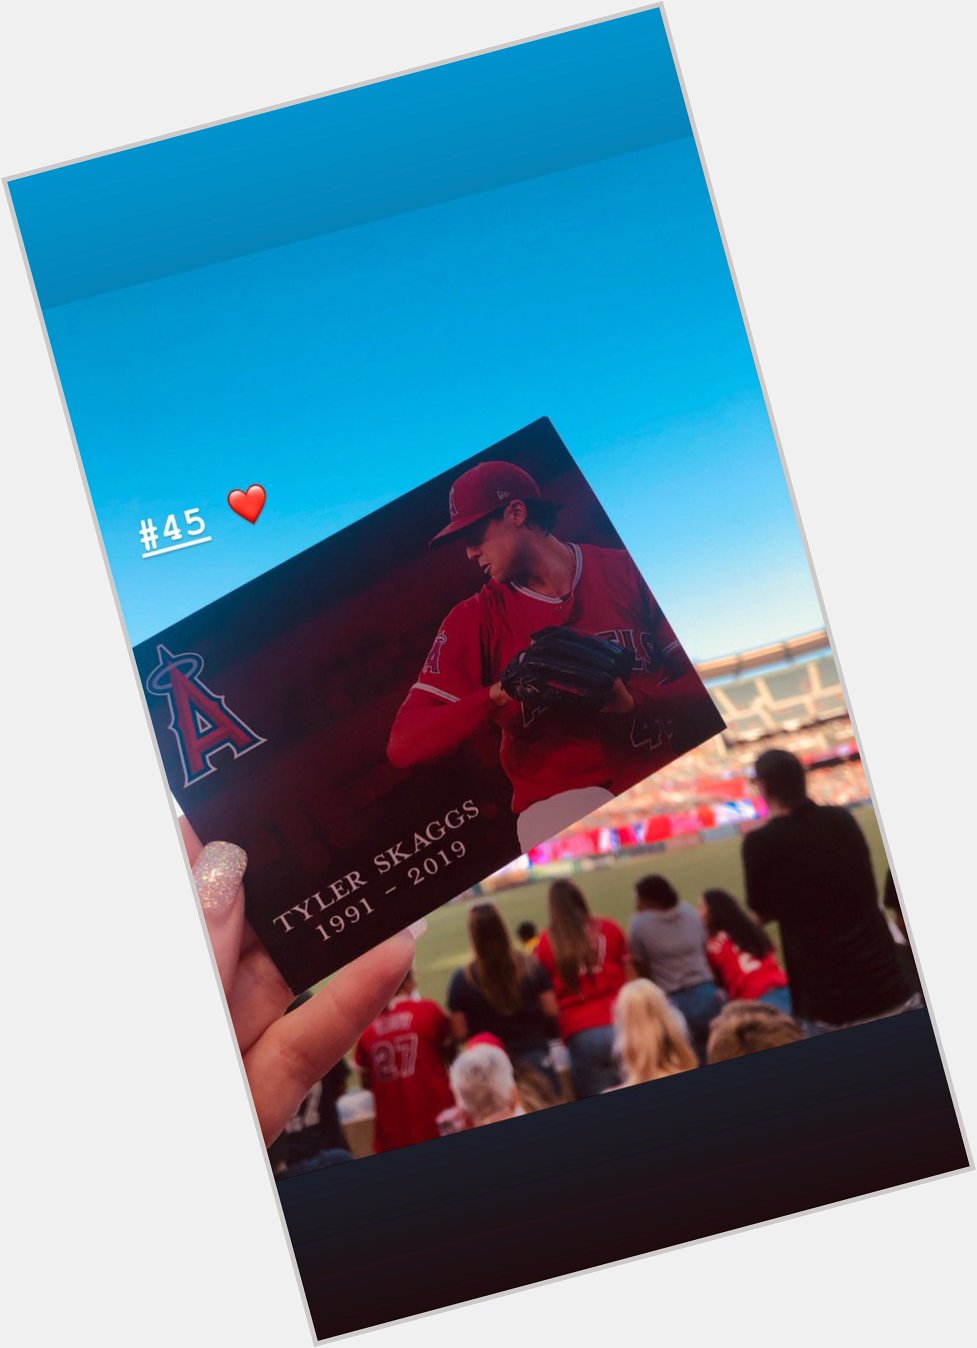 Happy birthday the our angel Tyler Skaggs. This win was for you! Our Angel      